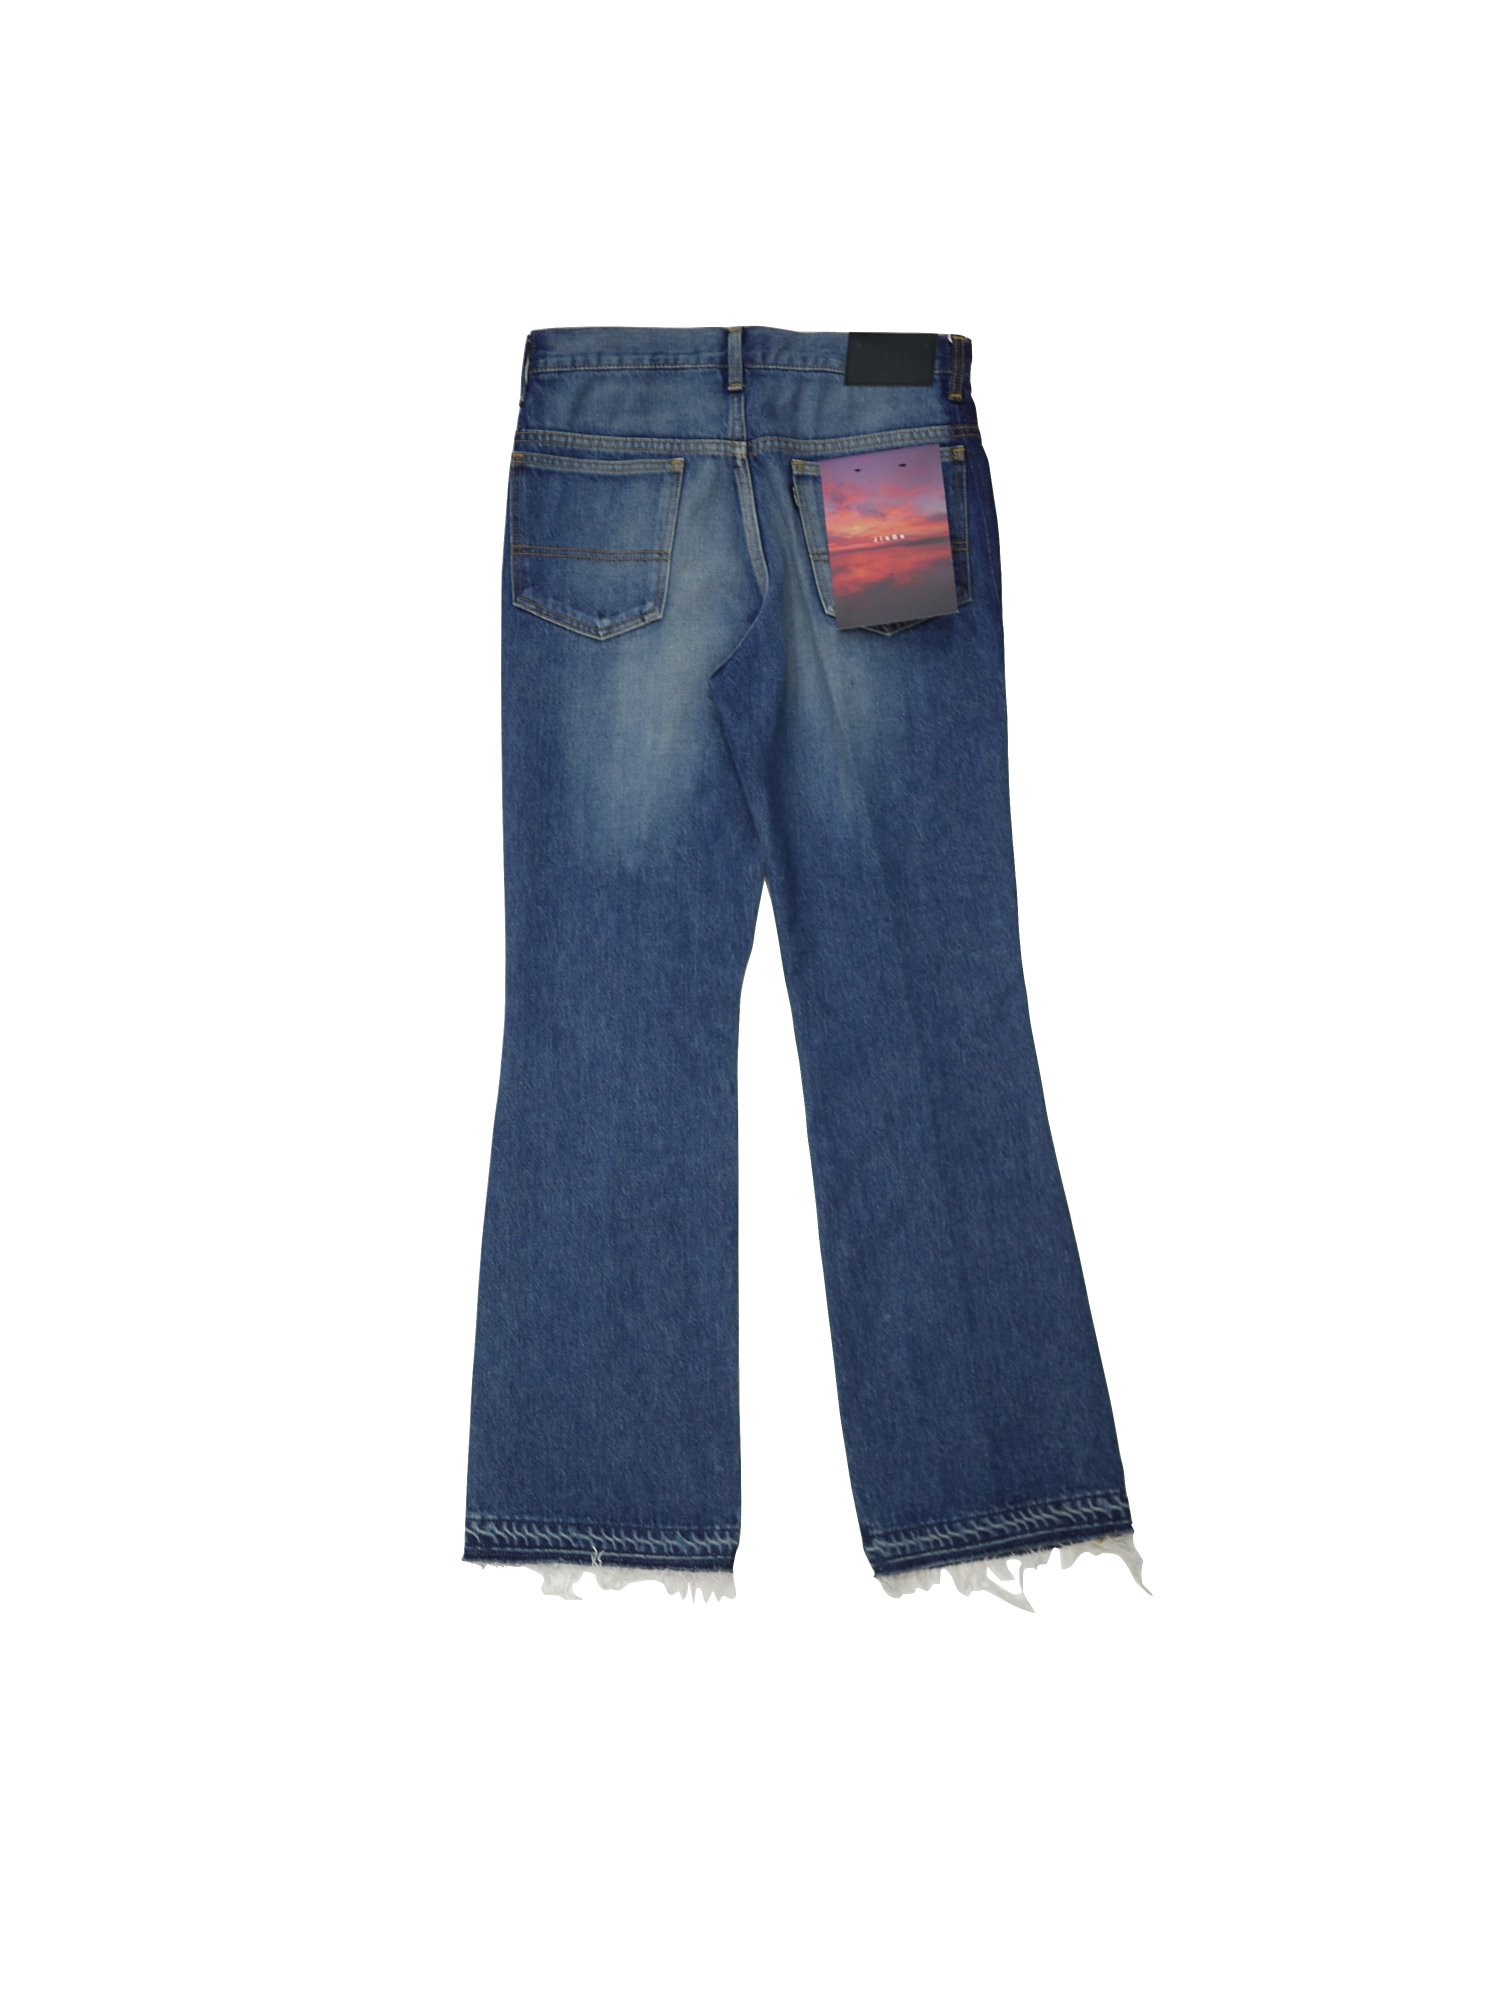 JieDa<br />USED FLARE PANTS / INDIGO<img class='new_mark_img2' src='https://img.shop-pro.jp/img/new/icons14.gif' style='border:none;display:inline;margin:0px;padding:0px;width:auto;' />